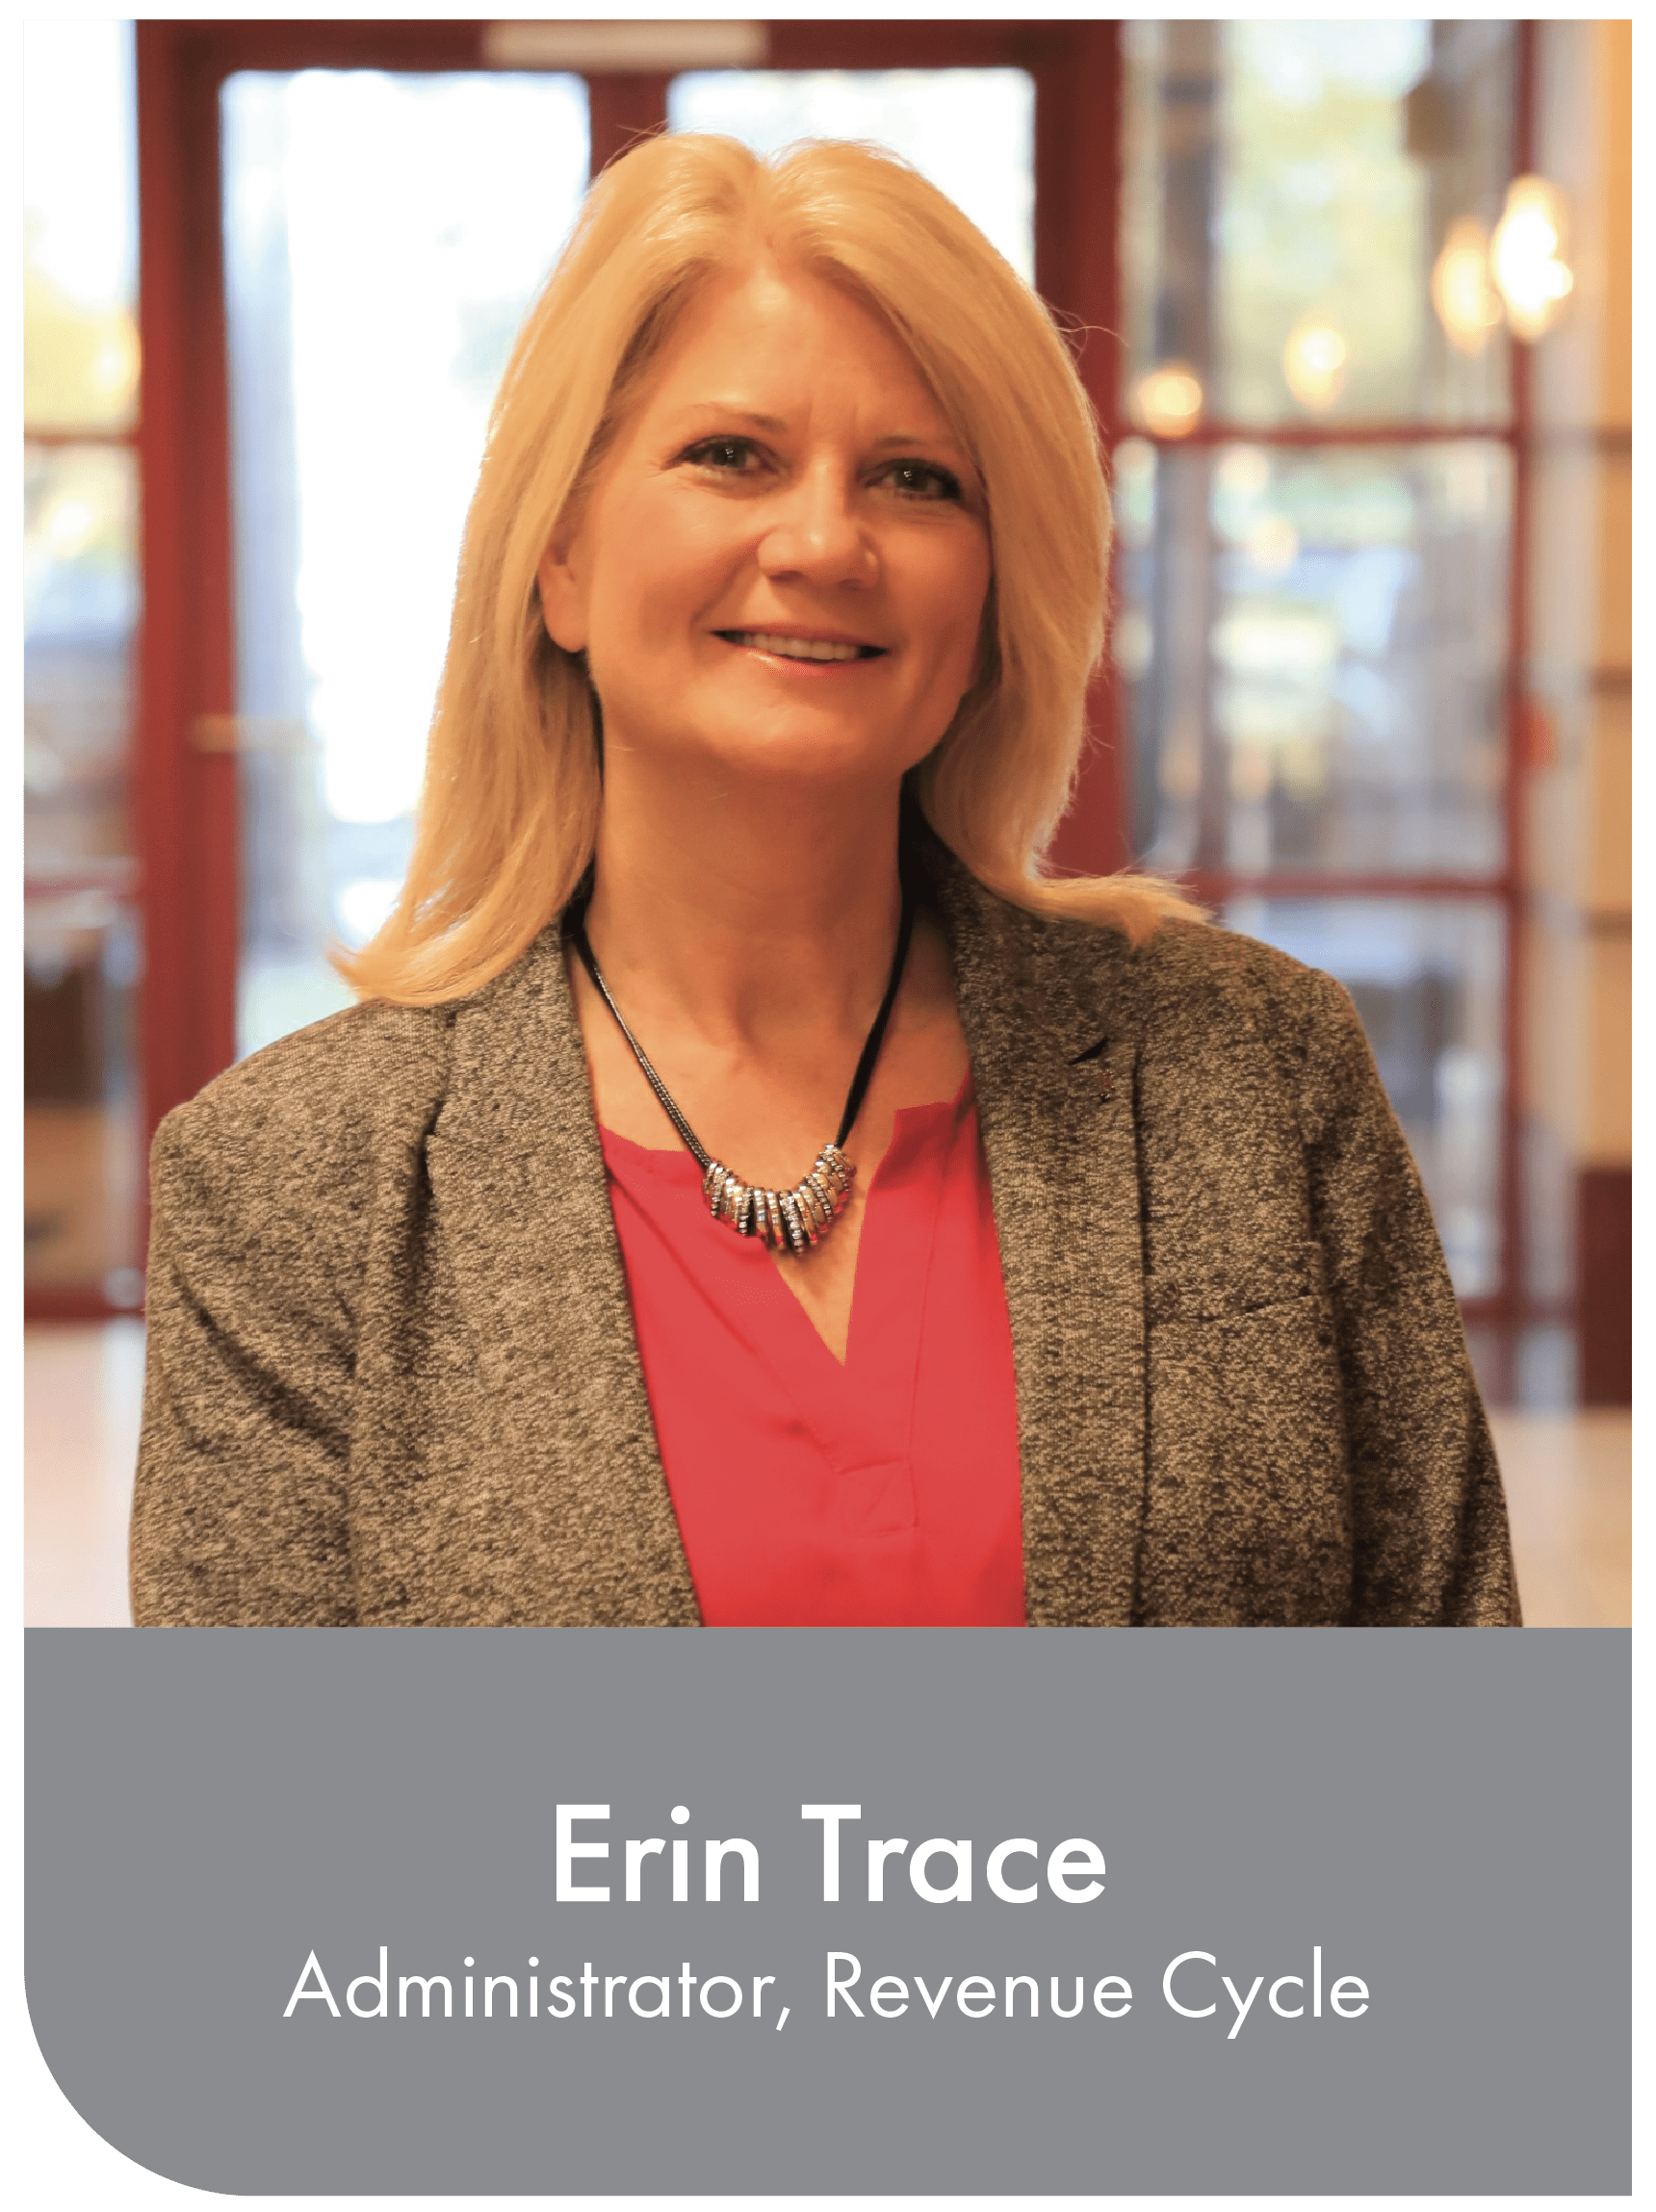 Erin Trace, Administrator, Revenue Cycle